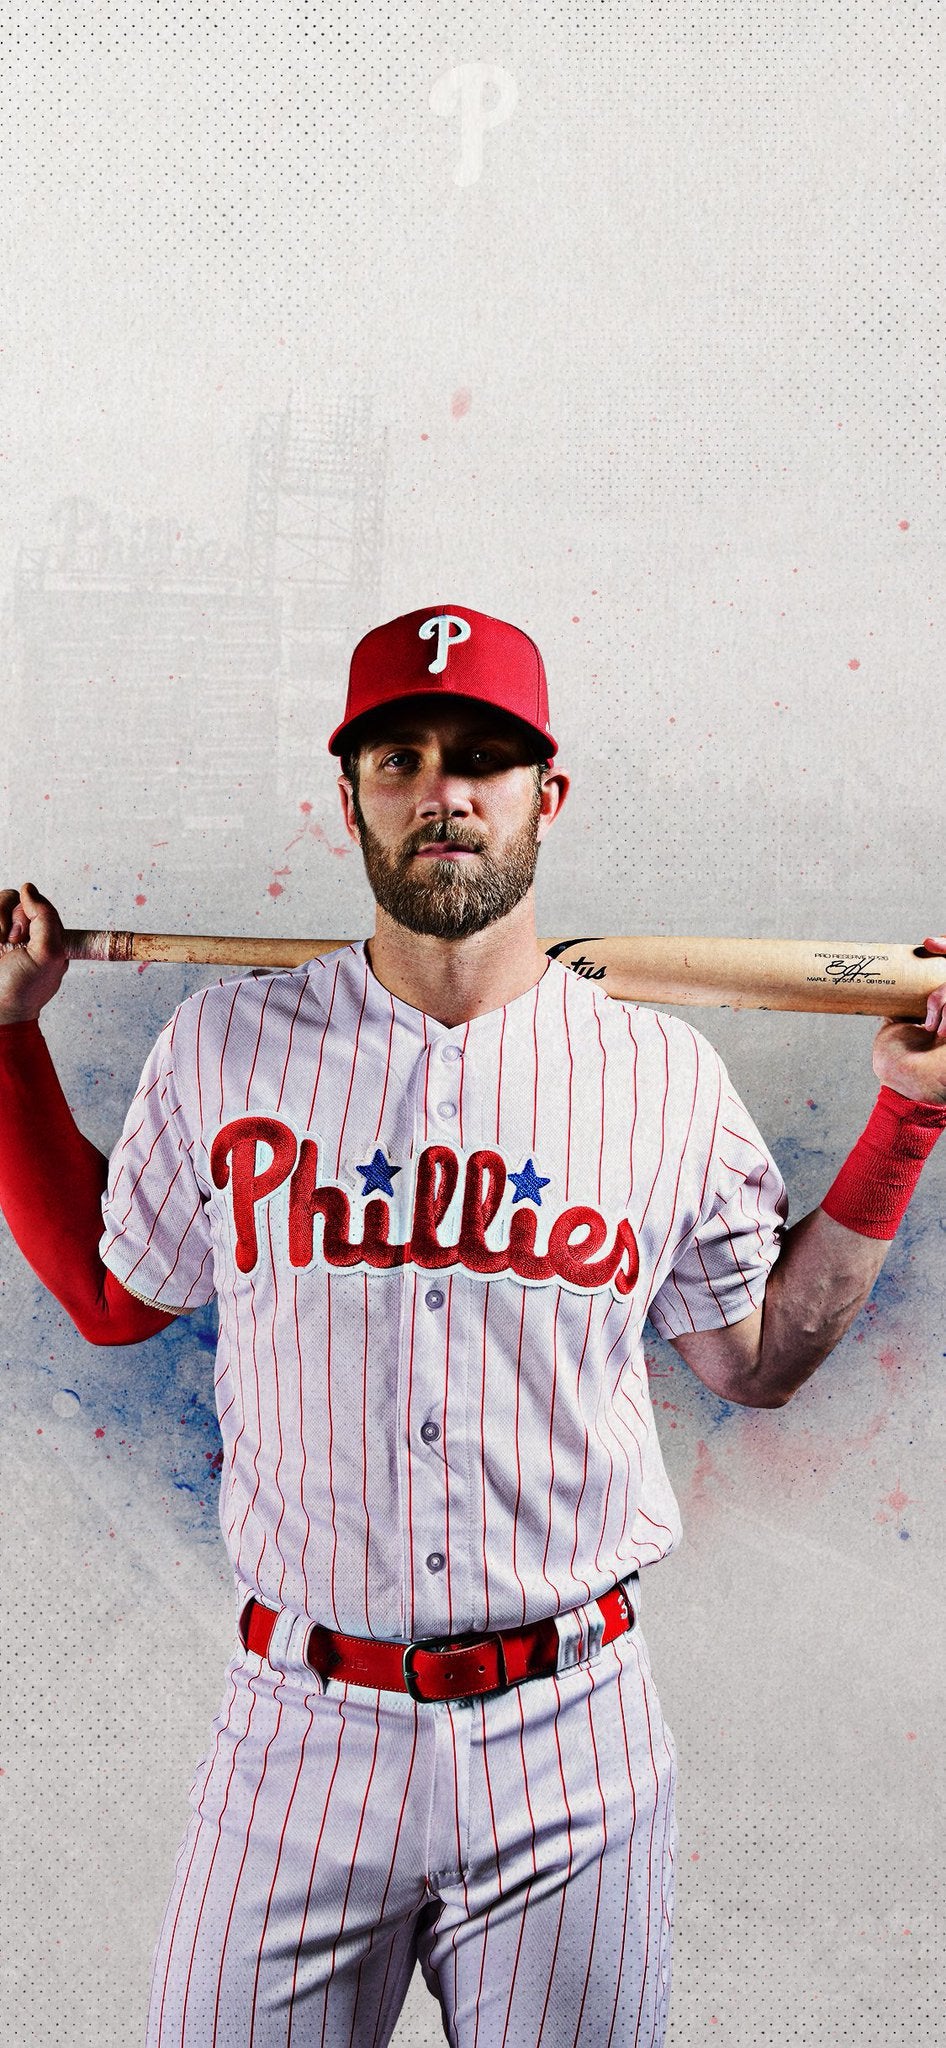 Free Download Phillies Wallpaper Wednesday Bryce Harper Edition Phillies 946x48 For Your Desktop Mobile Tablet Explore 49 Bryce Harper Phillies Wallpapers Bryce Harper Phillies Wallpapers Bryce Harper Wallpaper Phillies Wallpaper